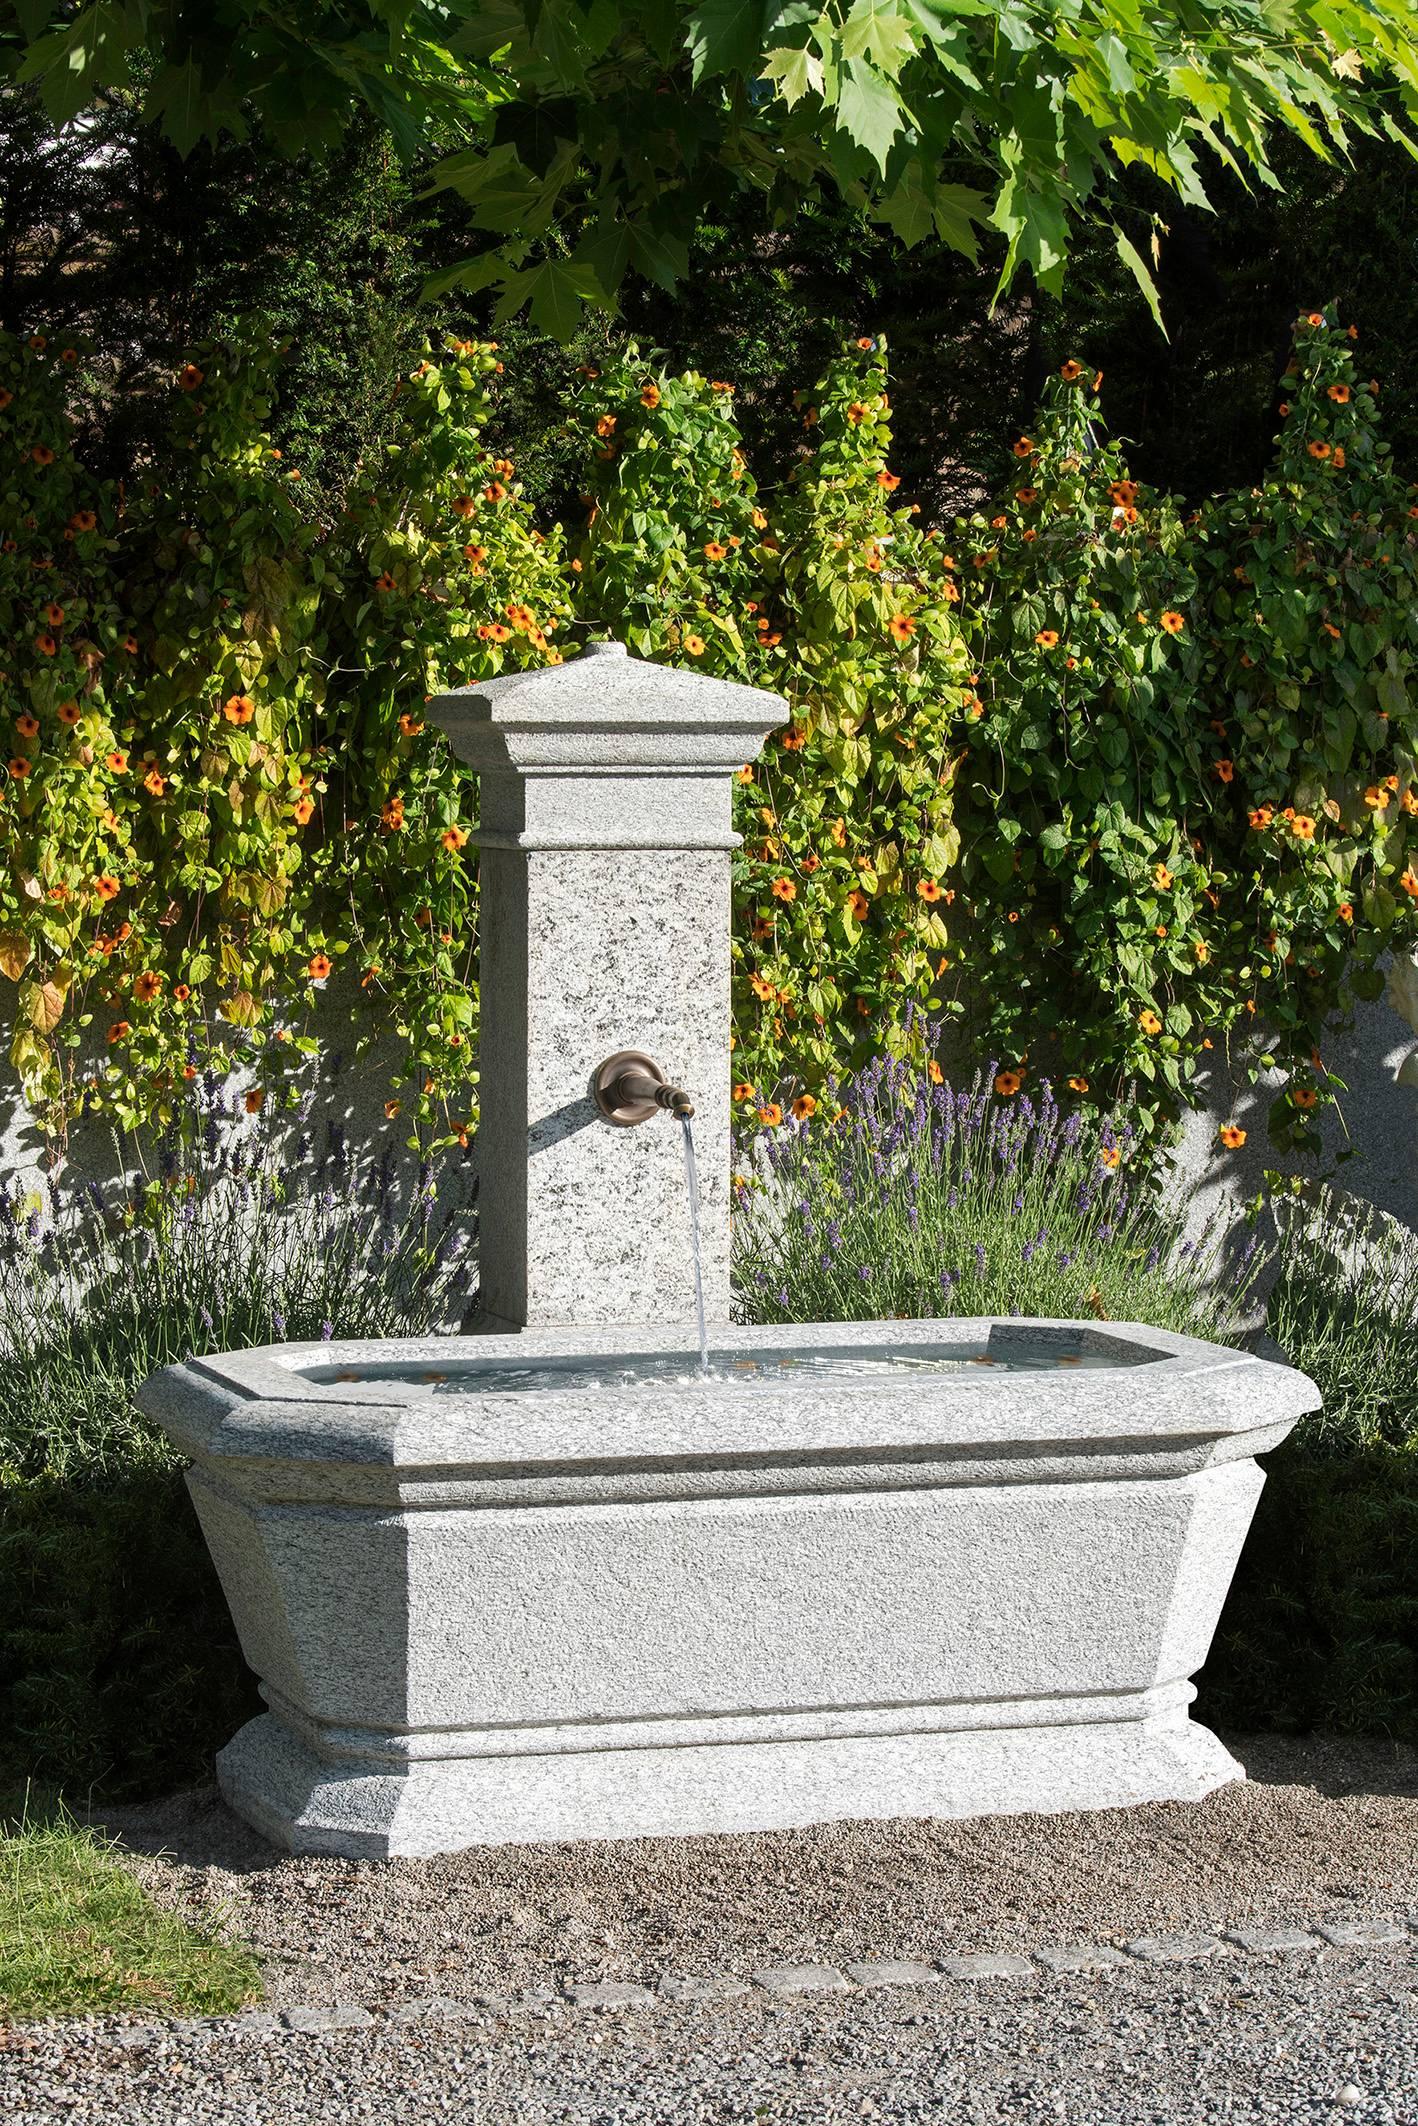 A very nice fountain with colomn from Zurich, Switzerland
The granite is from Switzerland as well.
The fountain stood in Zurich representative in front of a villa.